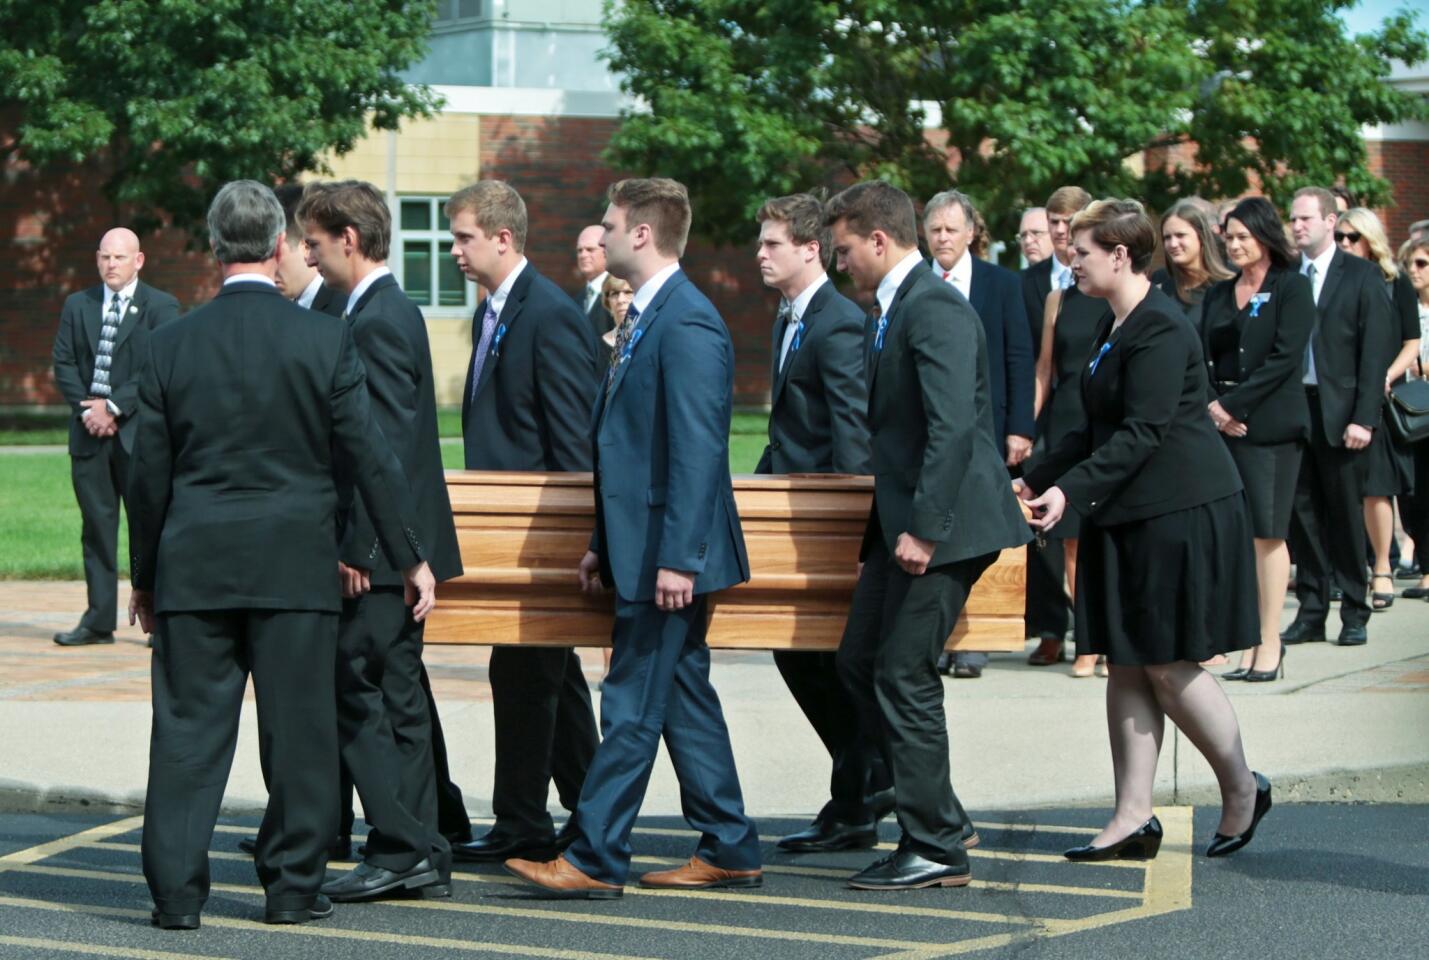 Pallbearers carry the coffin of Otto Warmbier during his funeral in Wyoming, Ohio.